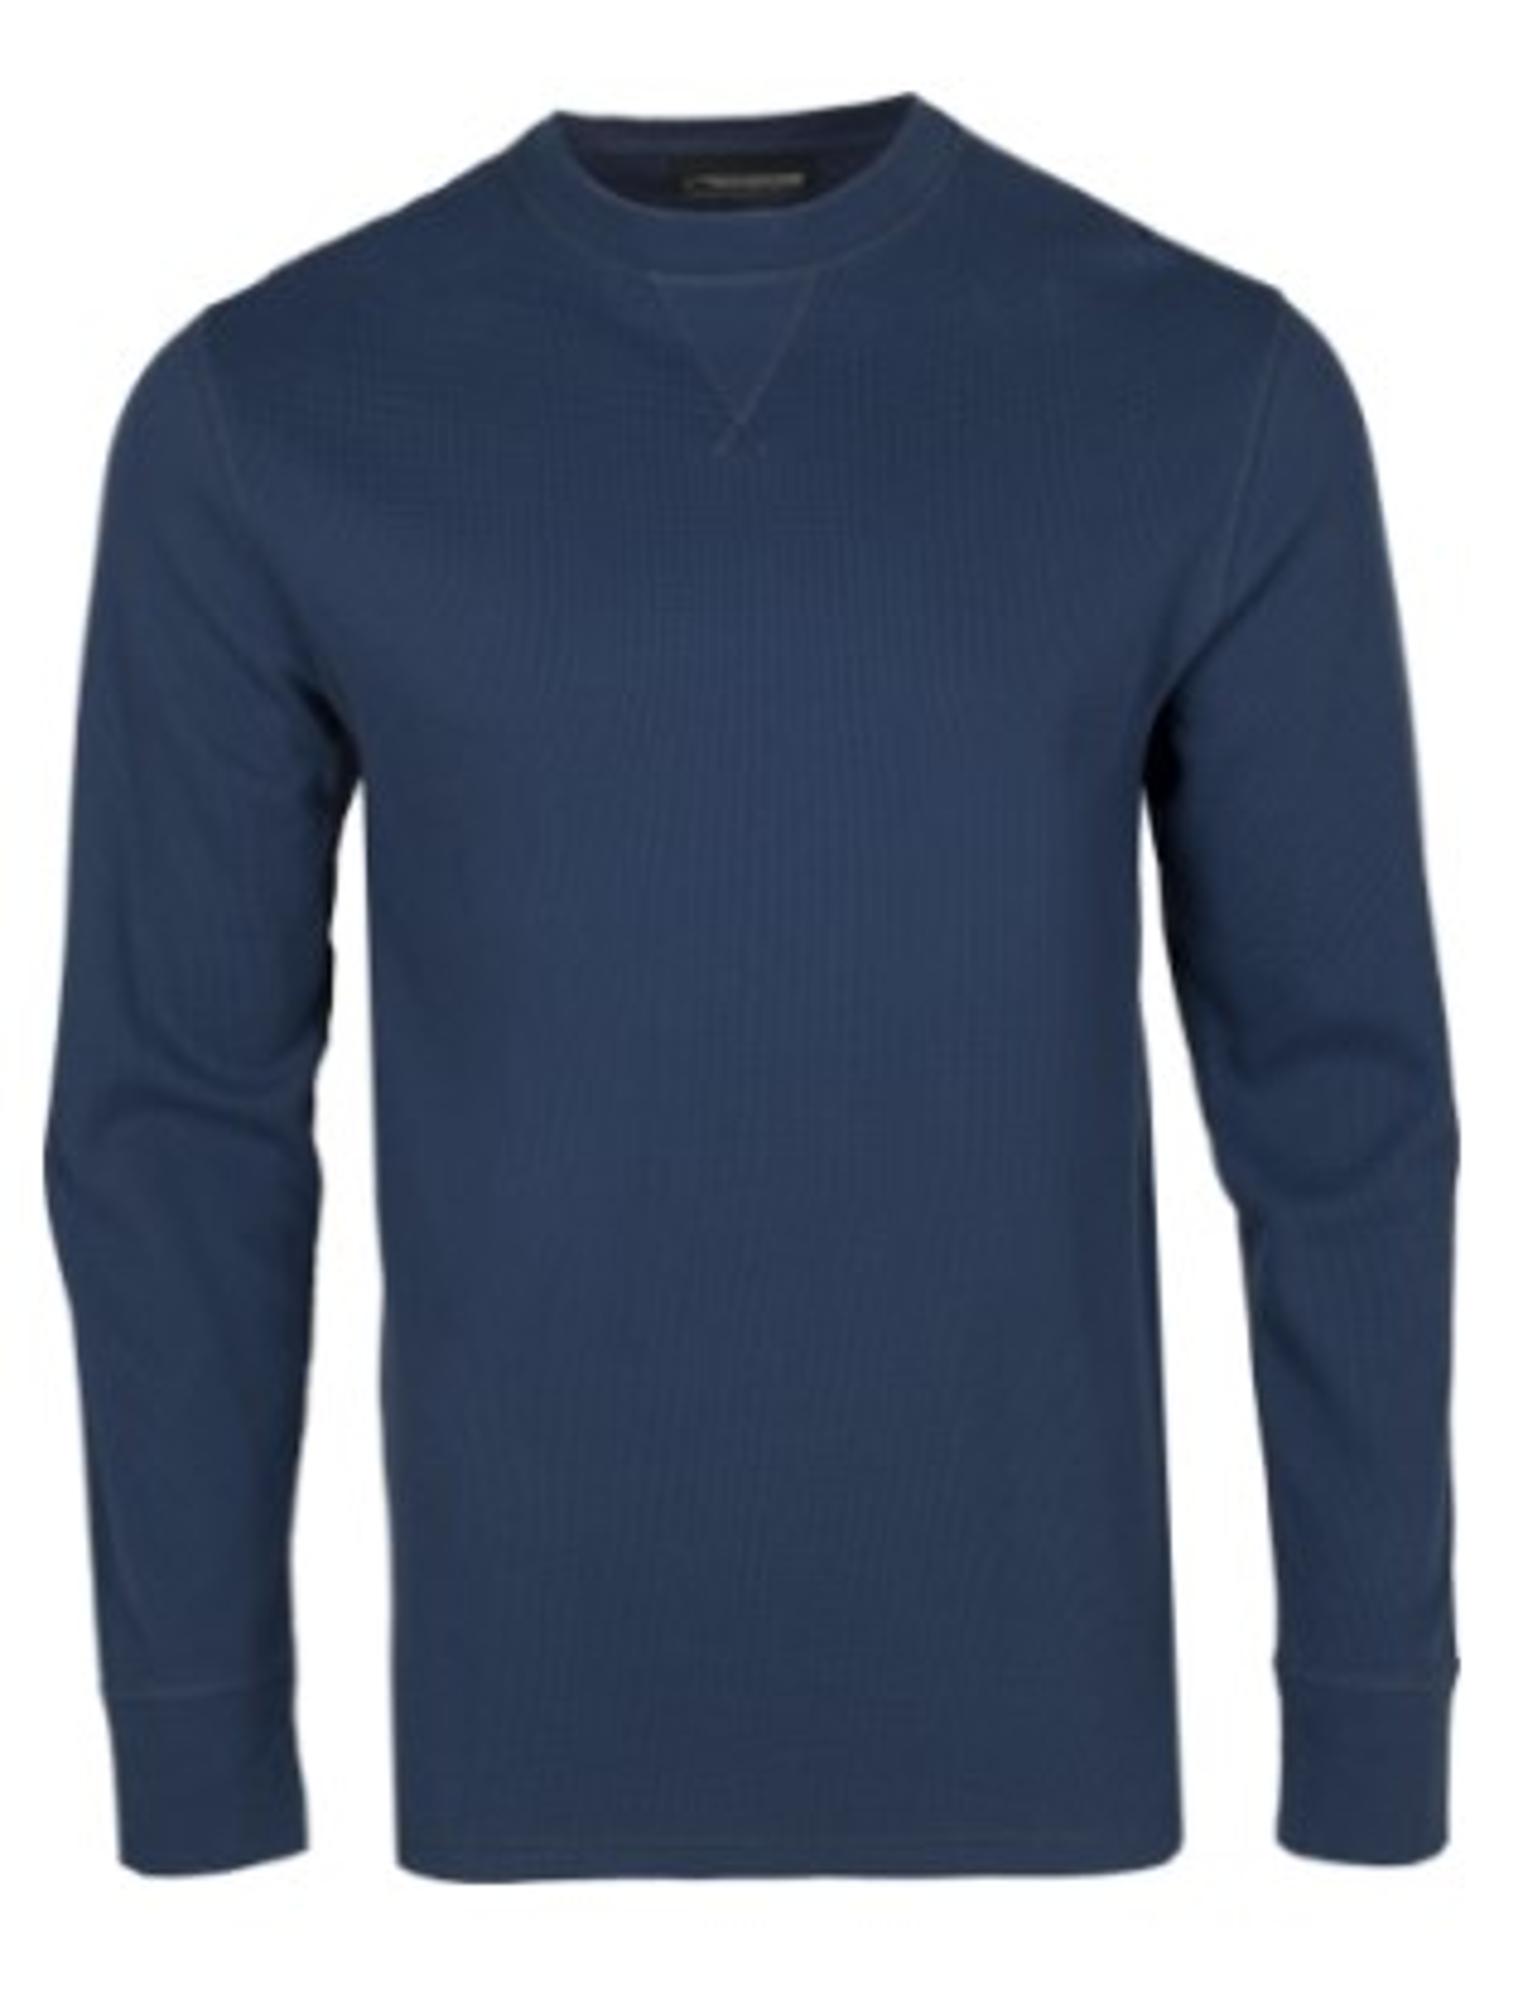 Axe Thermal Classic Fit Shirt